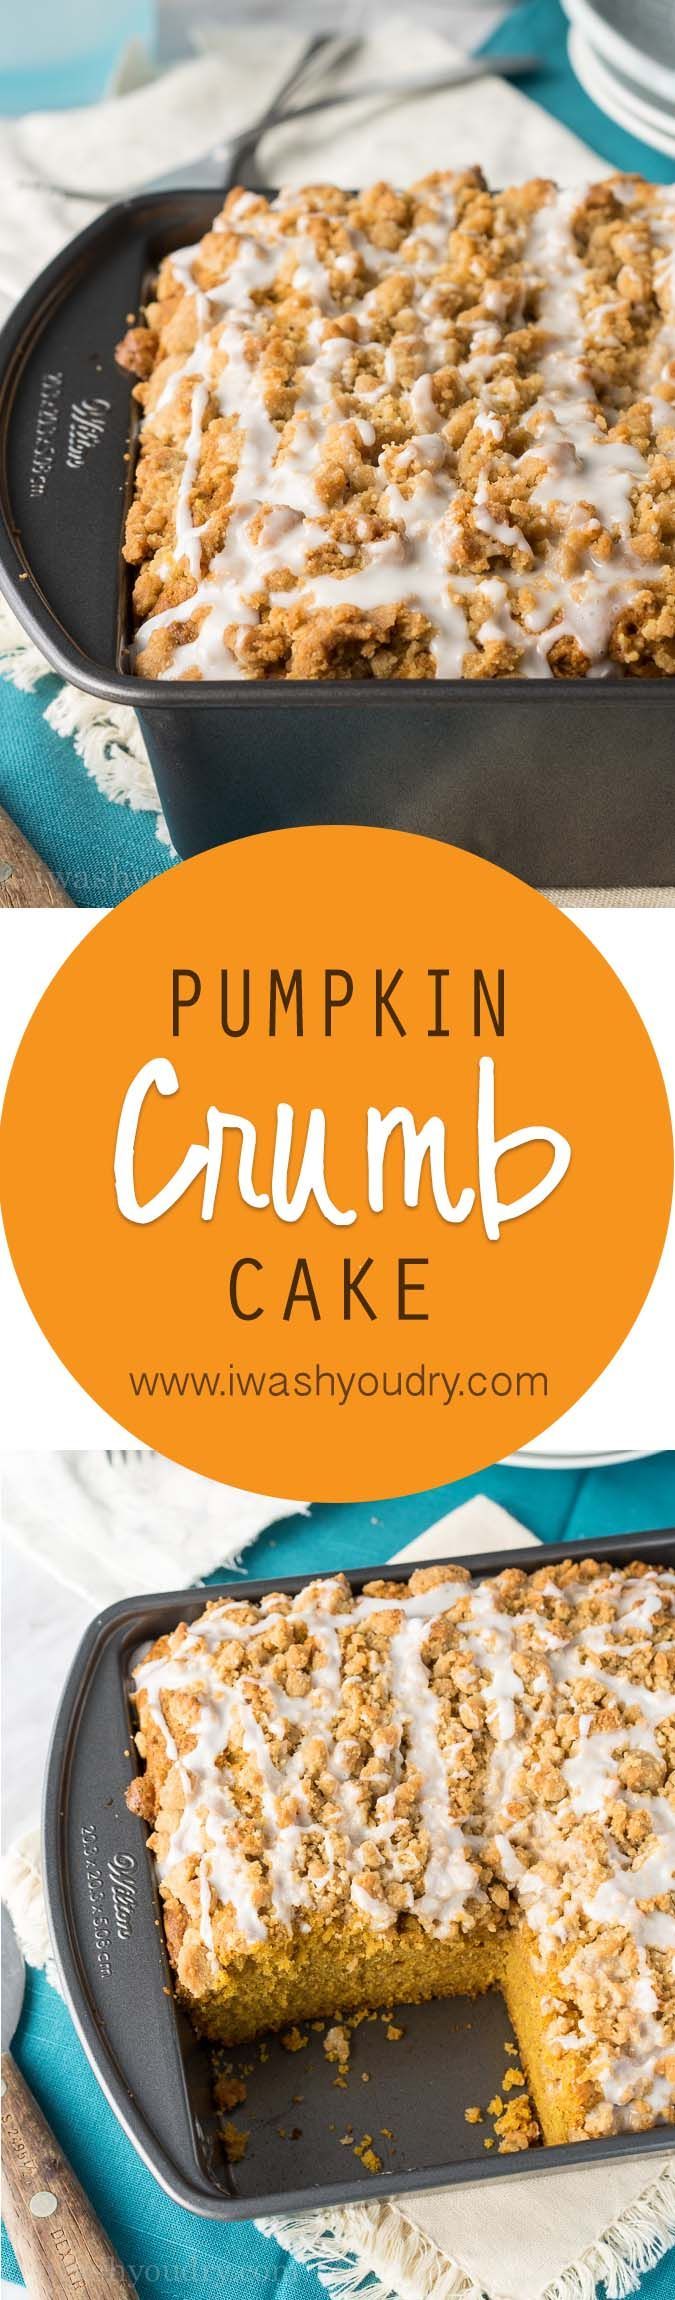 The most soft and delicious Pumpkin Crumb Cake with a sweet icing drizzled over a mound of delicious c